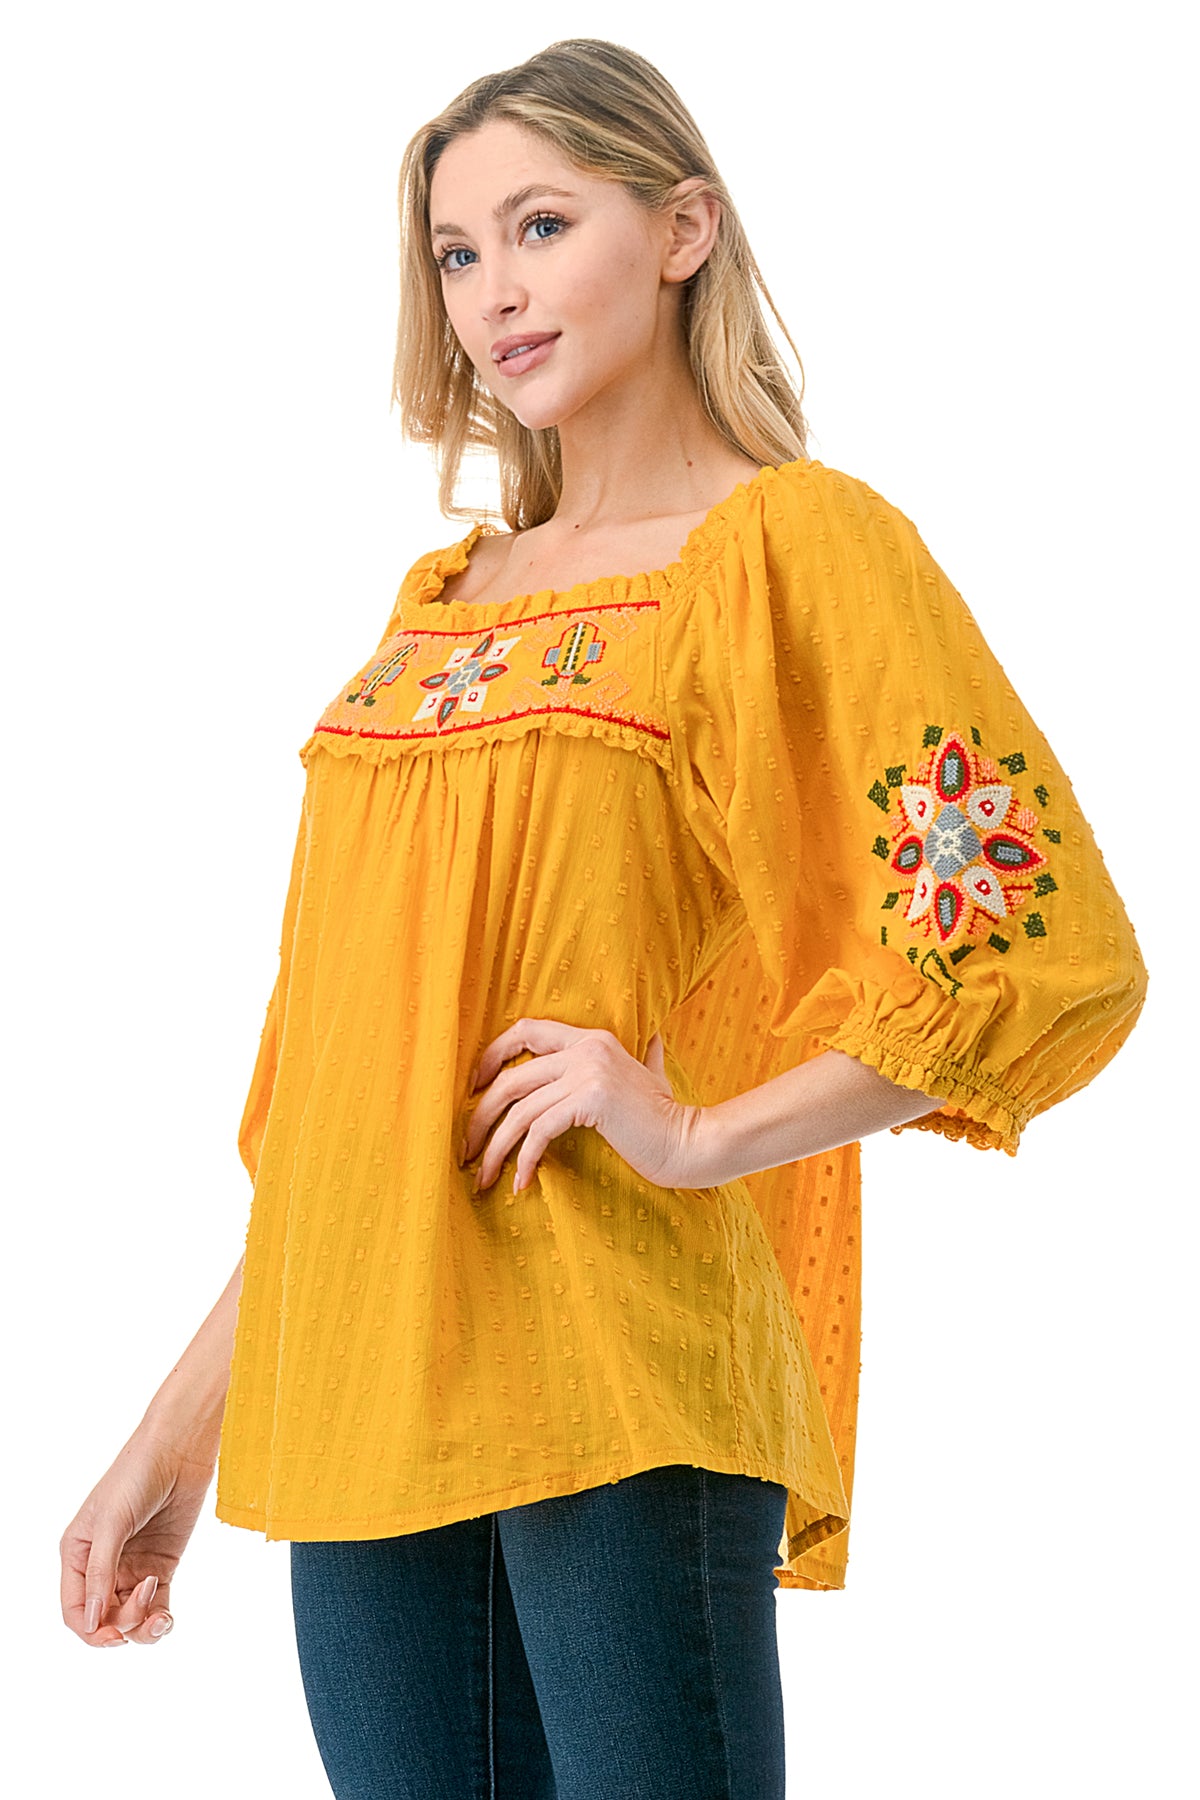 Blouse with folds on decolletage embellished with crystals mustard yellow -  YOKKO